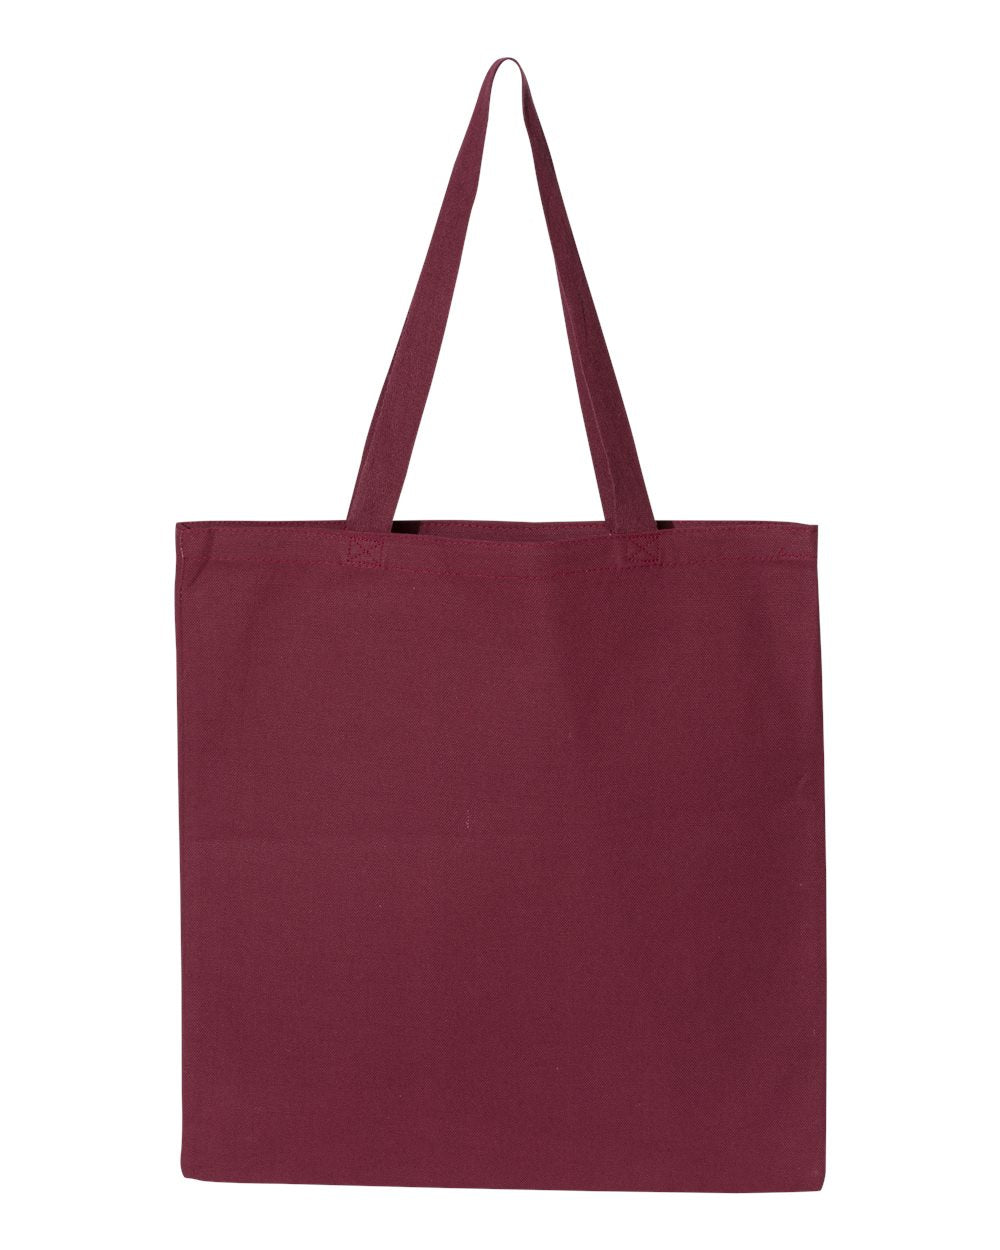 Q-Tees - Promotional Tote - Q800